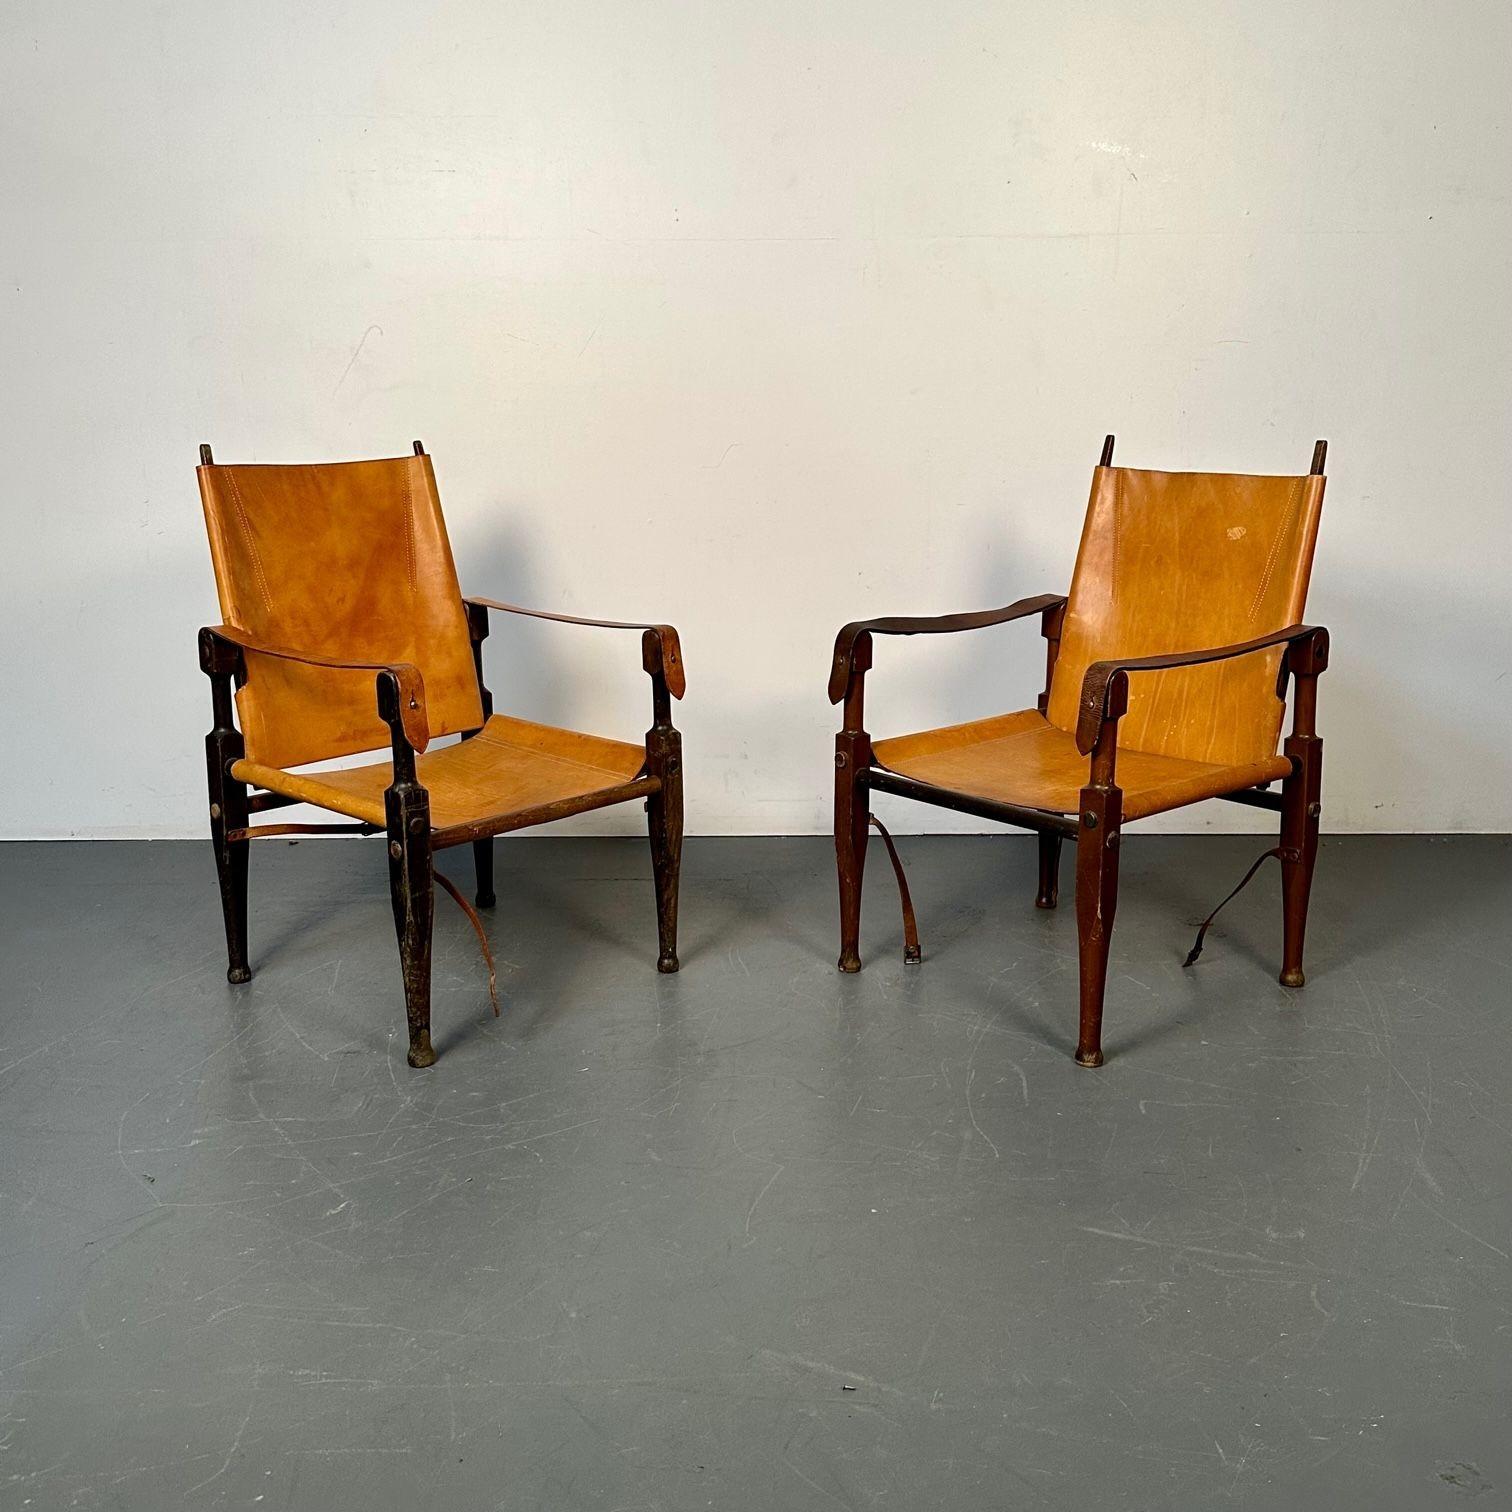 Kaare Klint, Danish Mid-Century Modern, Safari Lounge Chairs, Tan Leather, 1940s In Good Condition For Sale In Stamford, CT